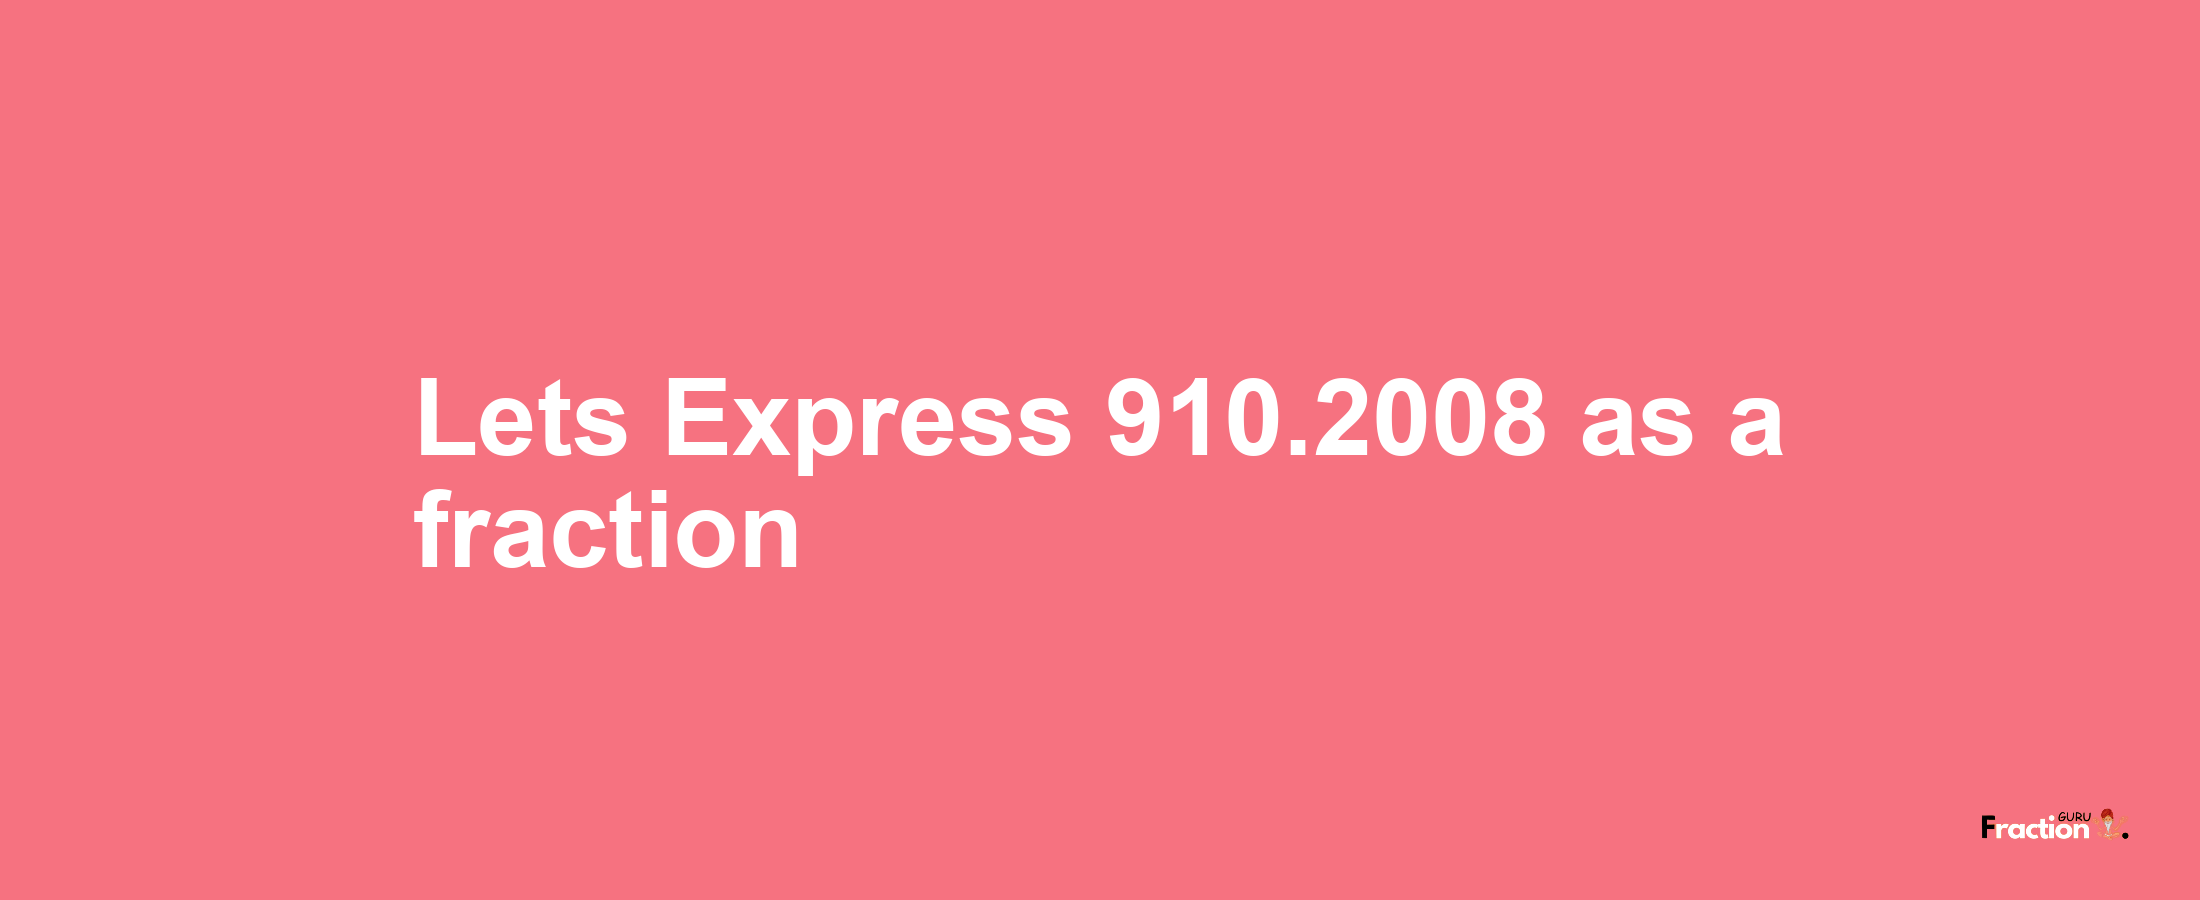 Lets Express 910.2008 as afraction